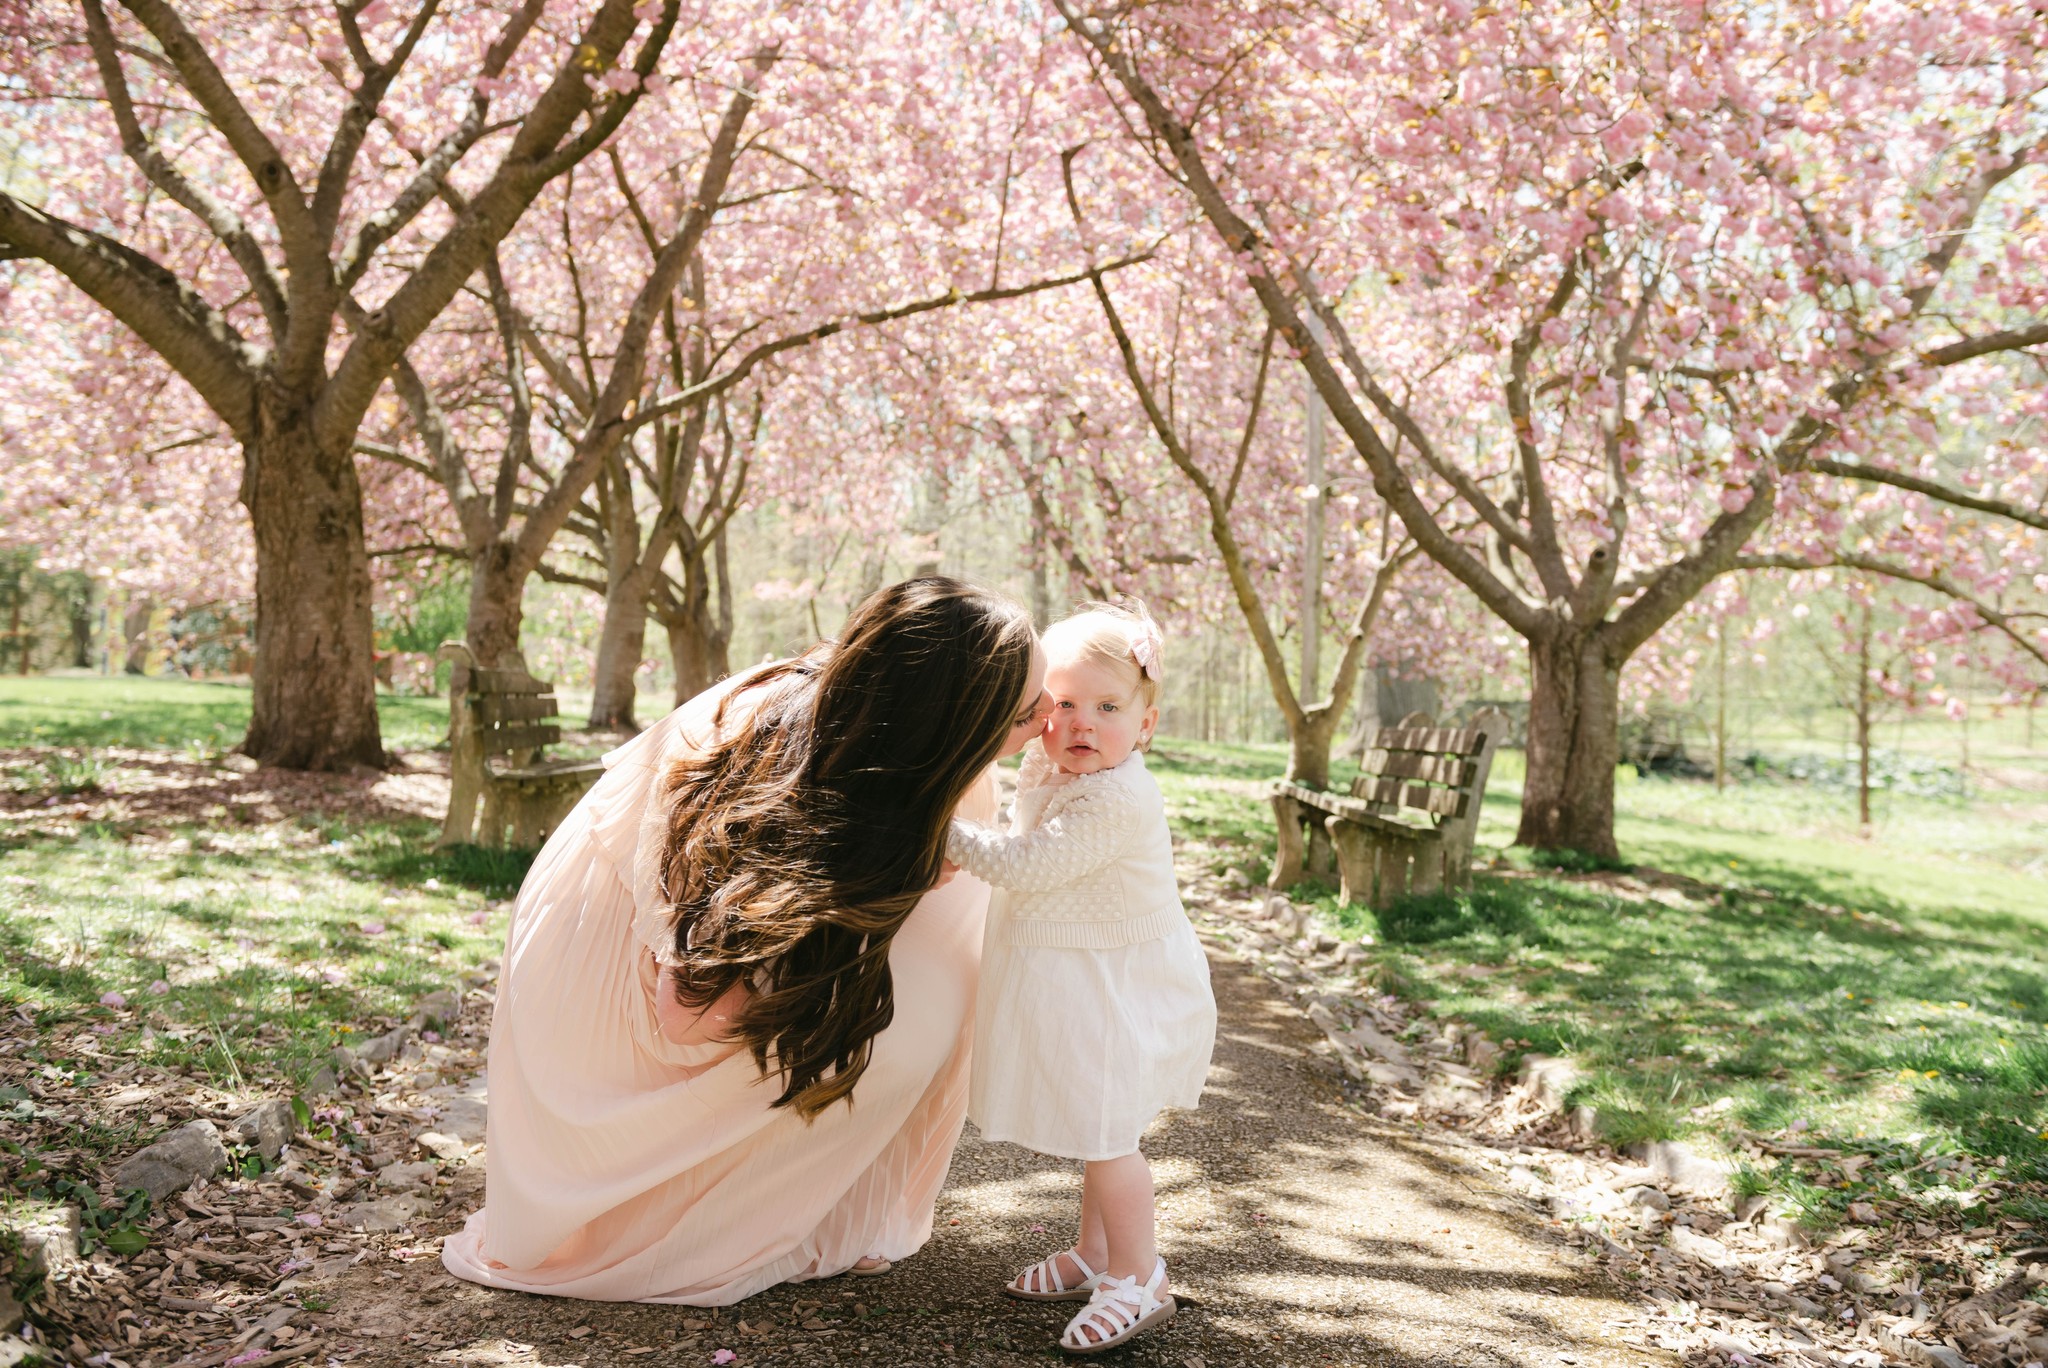 A mom in a pink dress kneels down to kiss her toddler daughter in a white dress in a park path lined with pink blossoming trees from layla's boutique